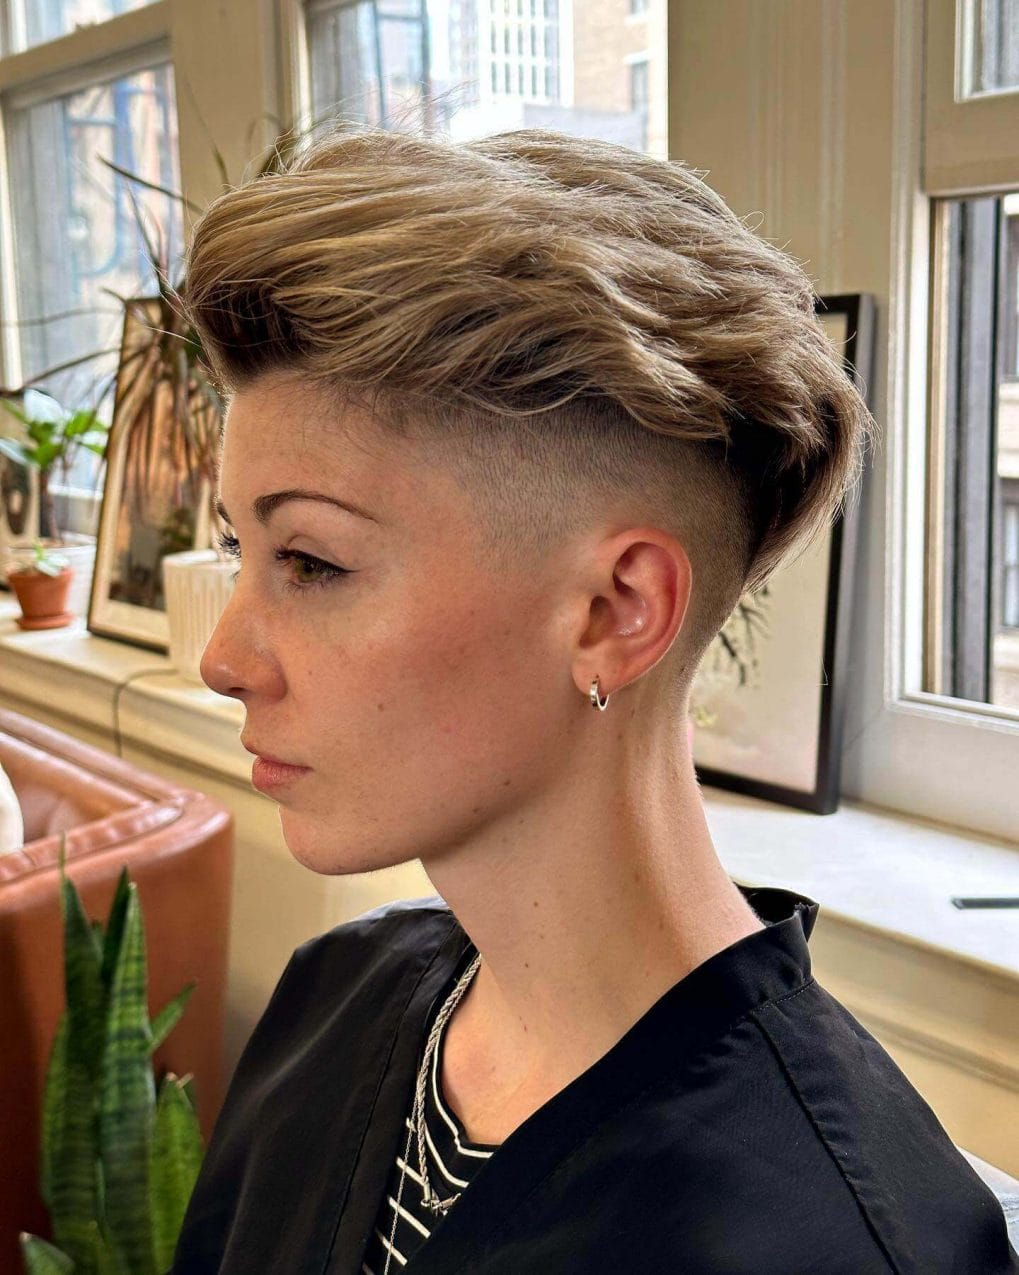 Sandy-highlighted brunette pixie with edgy undercut.